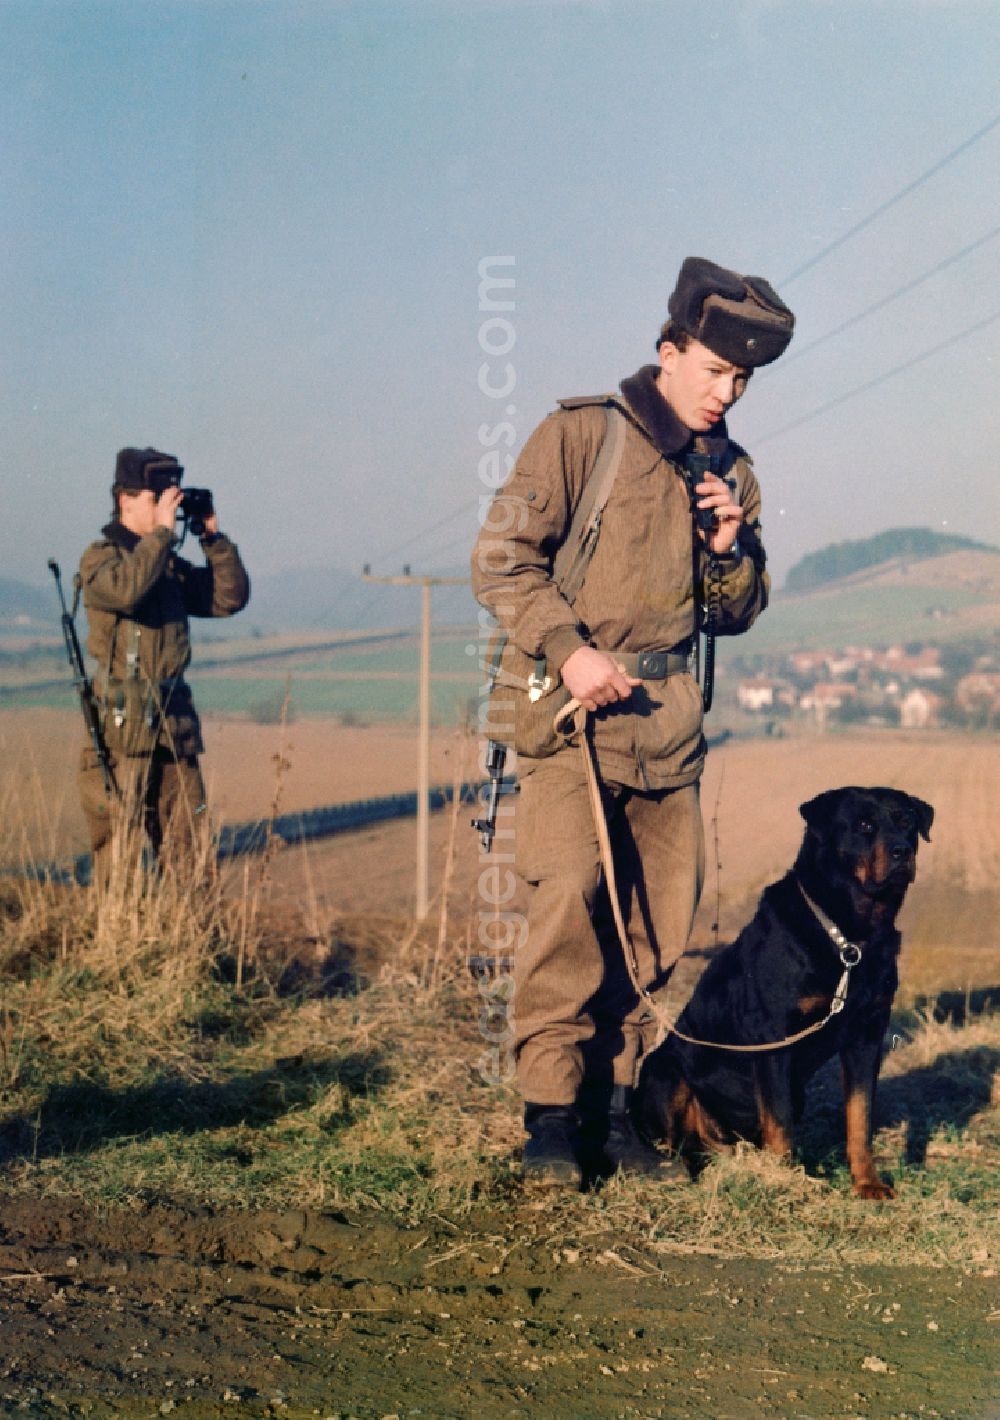 GDR image archive: Kella - Patrol - patrol of soldiers of the East German border troops in border areas - border strip at Kella today's state of Thuringia